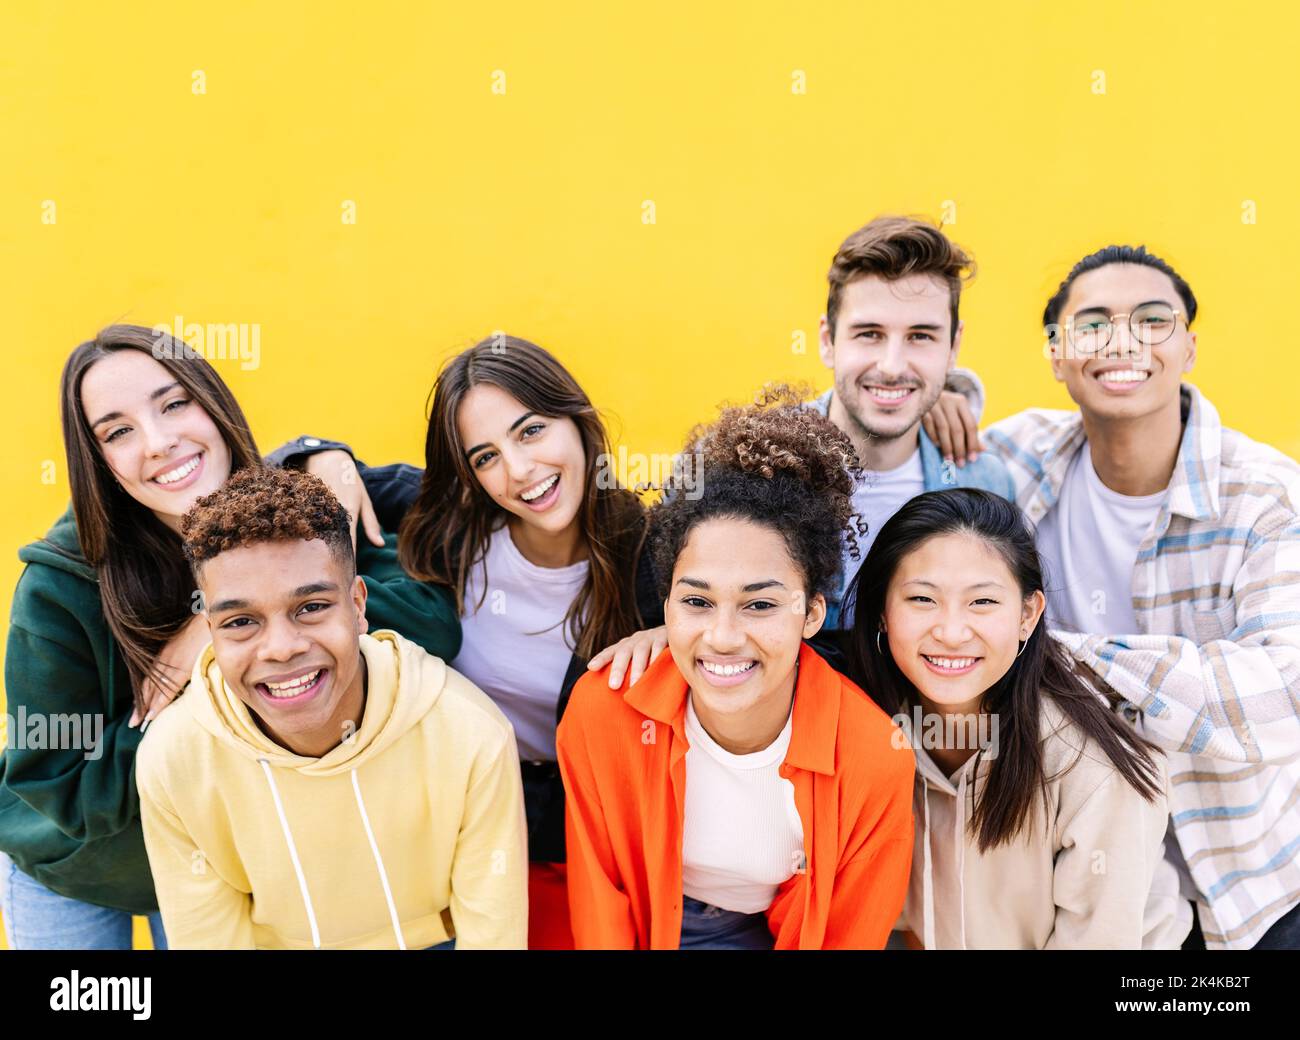 Group portrait of young multiethnic student friends against yellow wall Stock Photo